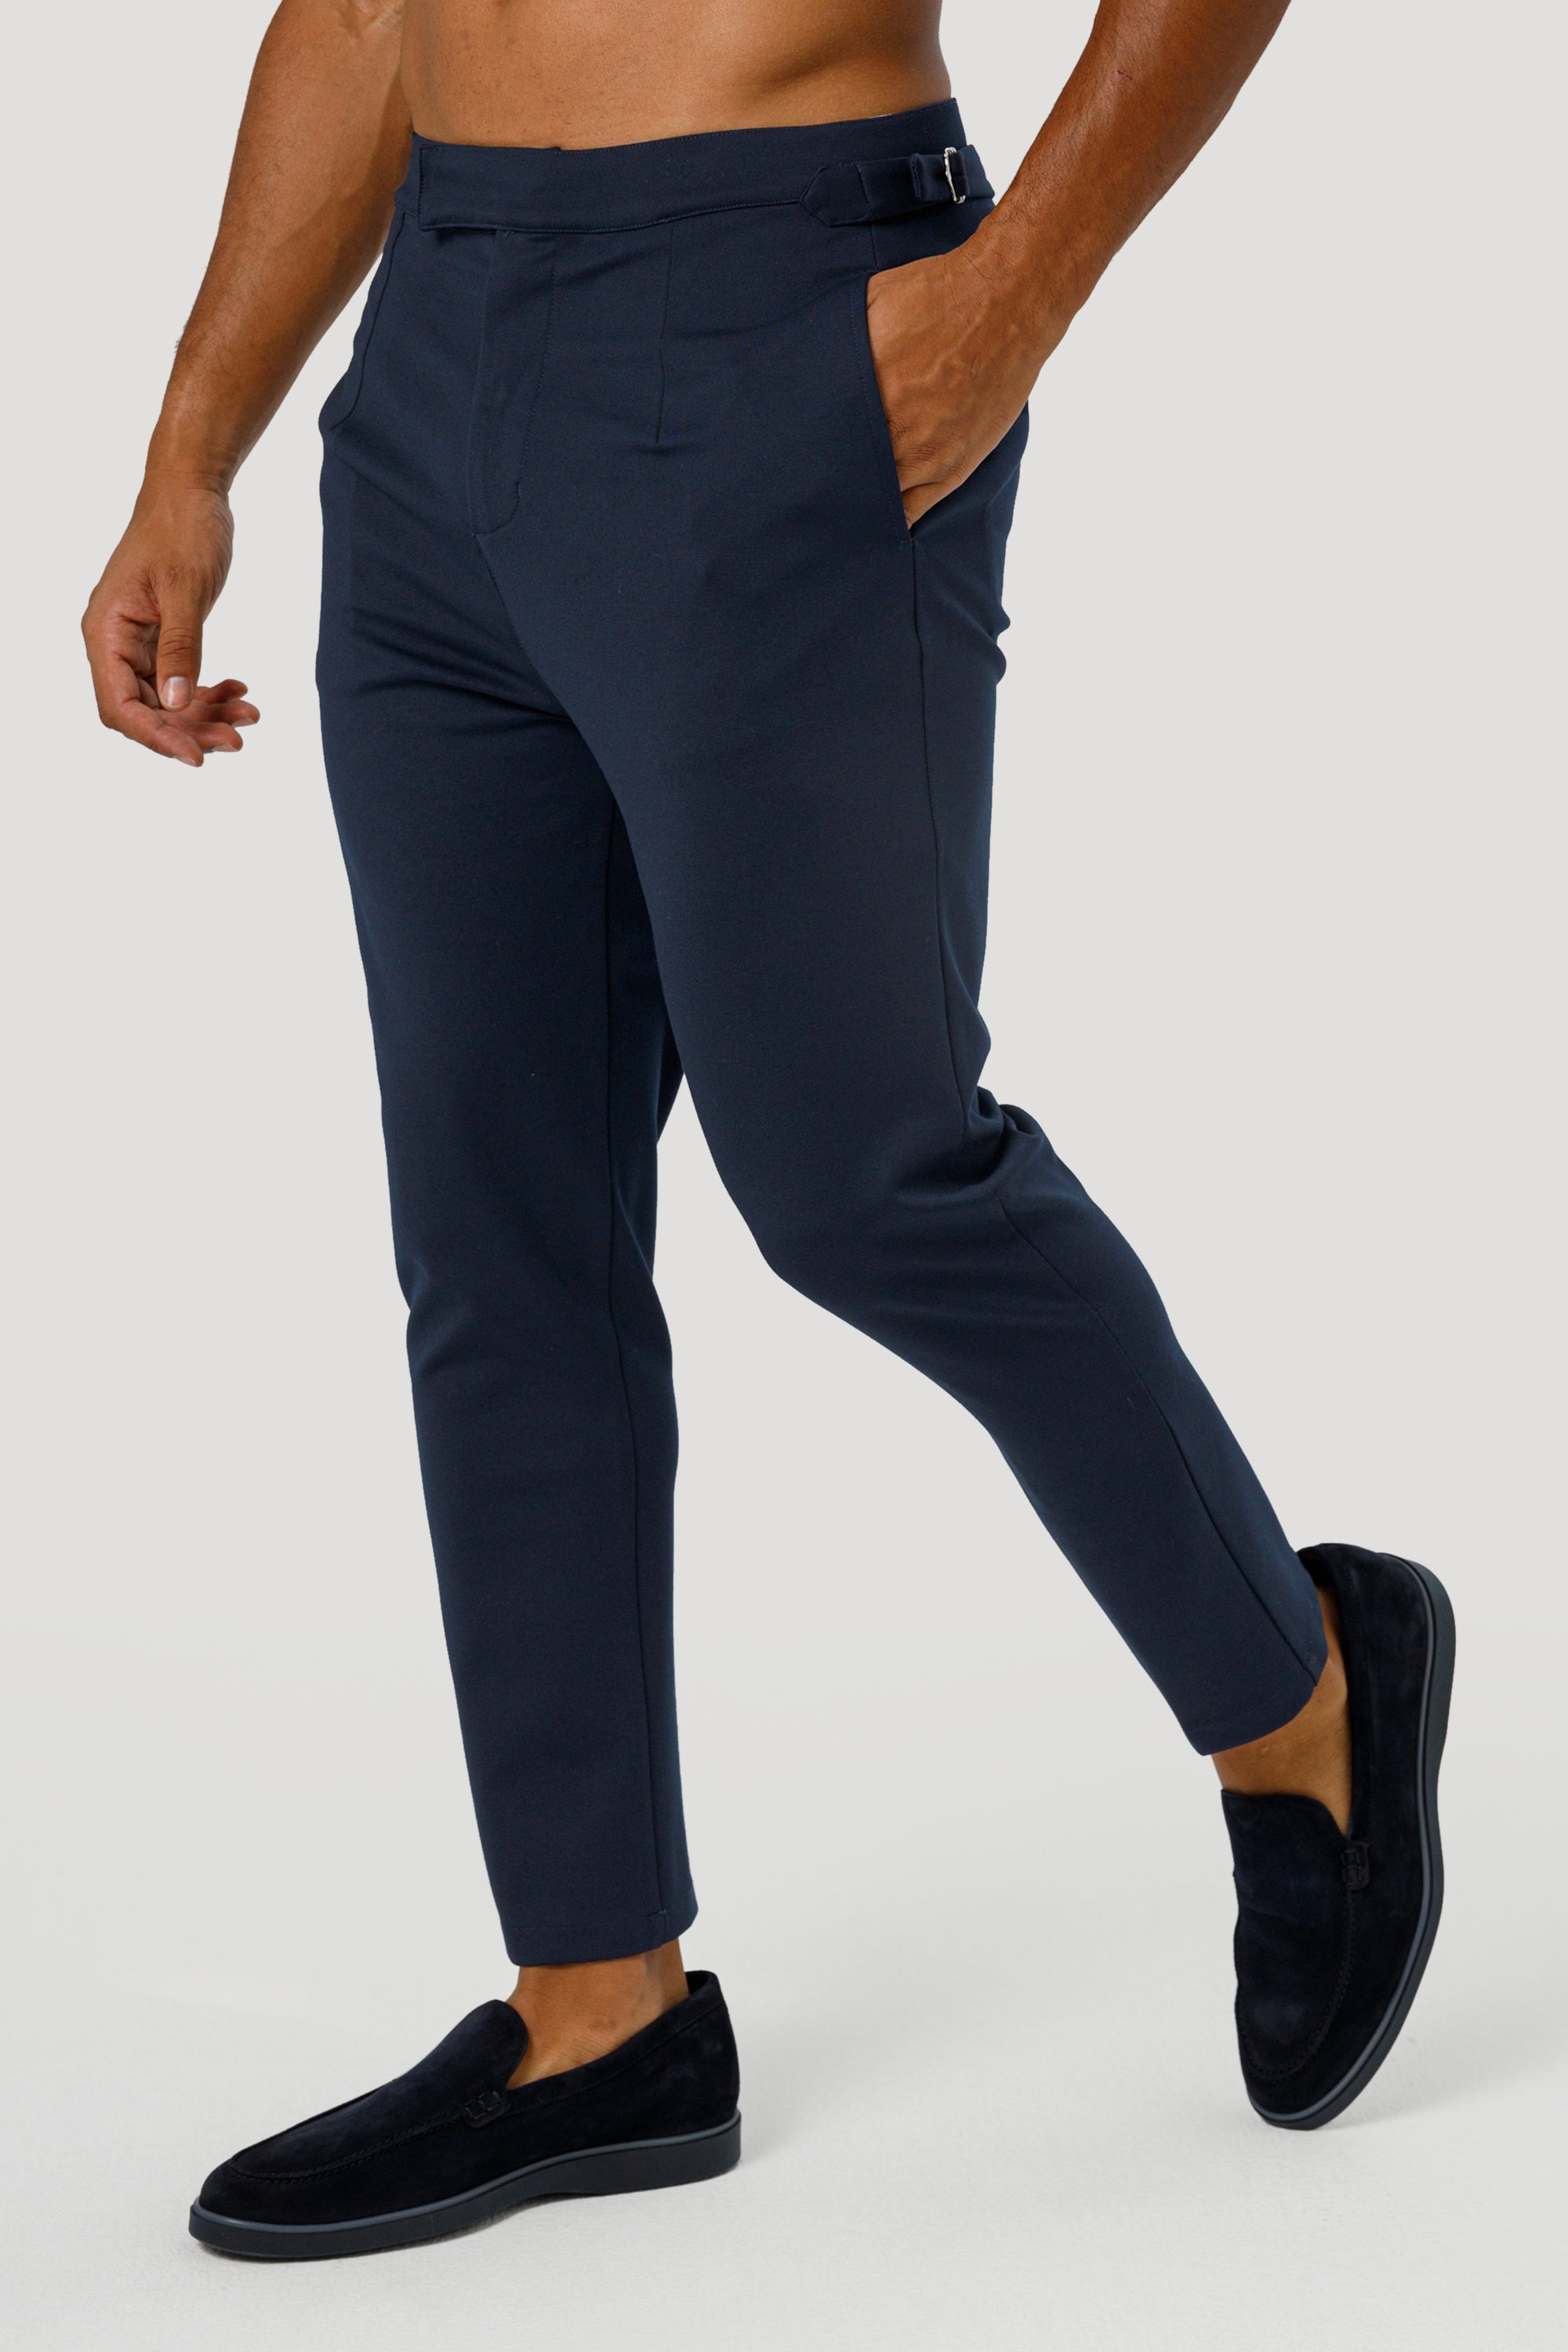 THE ALESSIO TROUSERS - NAVY BLUE